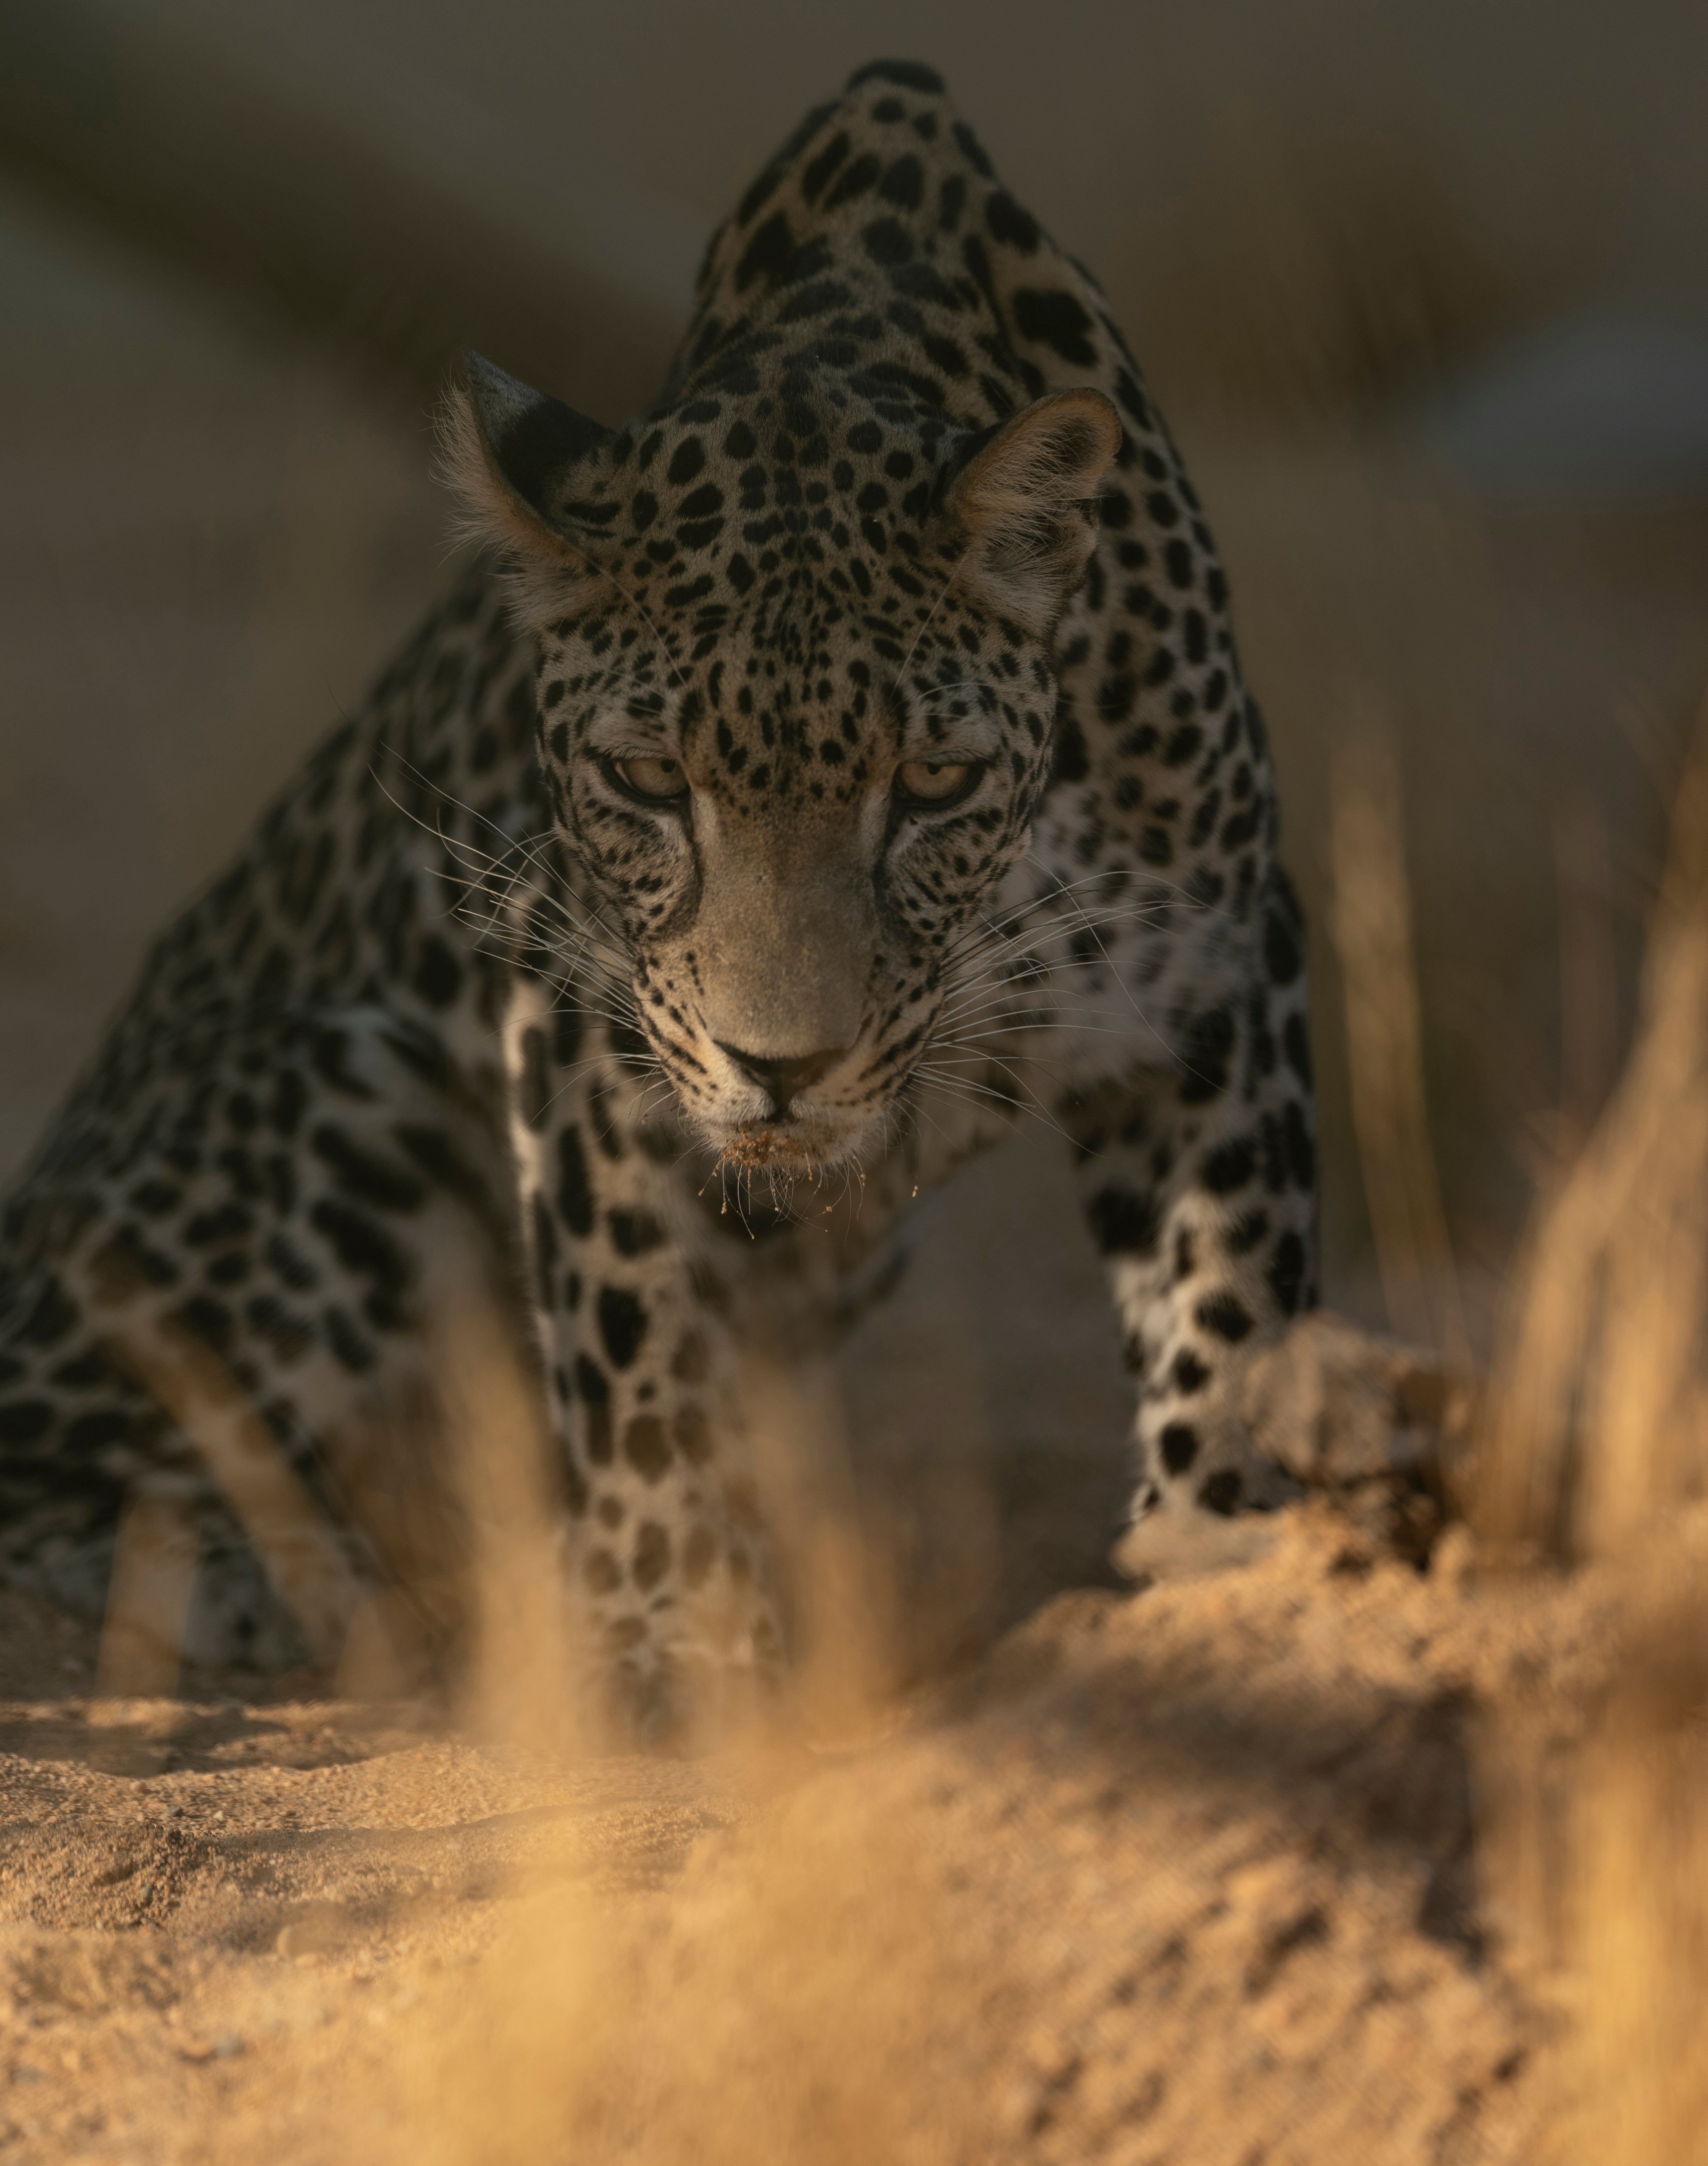 The reintroduction of Arabian leopards will be key in the prevention of overgrazing